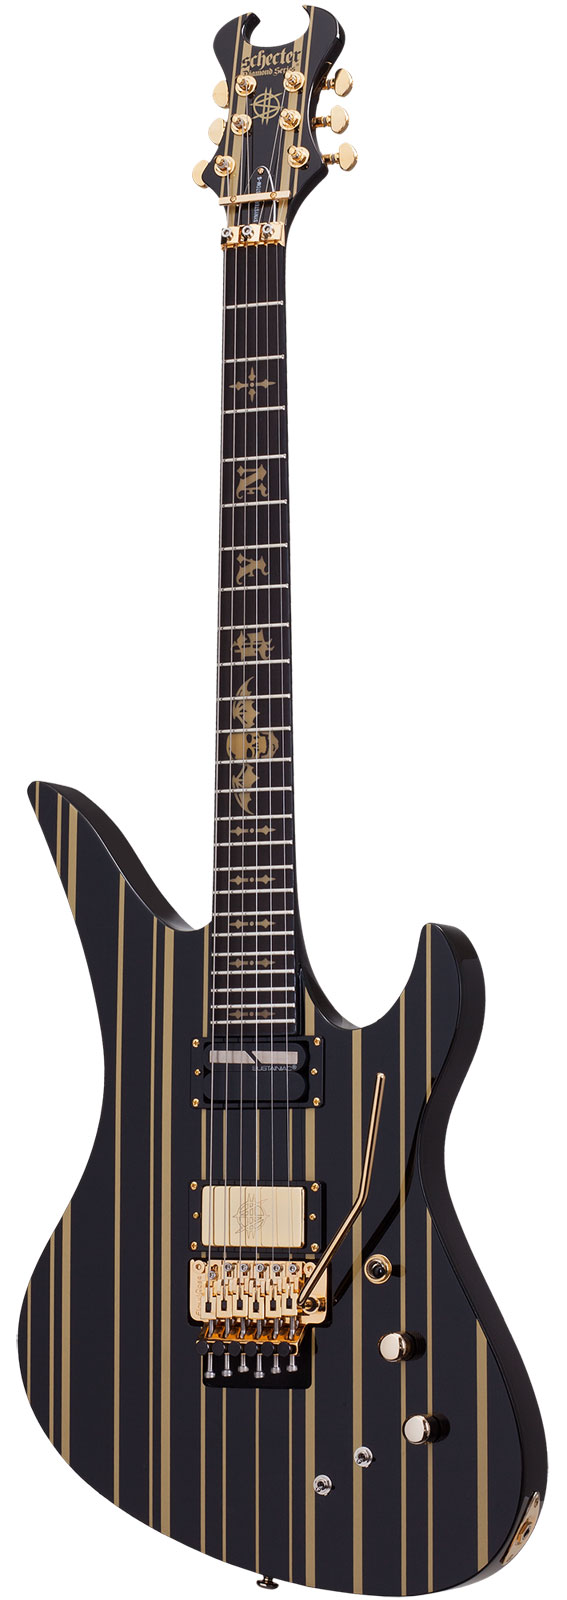 SCHECTER CUSTOM SUSTAINIAC SYNYSTER GATE SIGNATURE BLACK GOLD